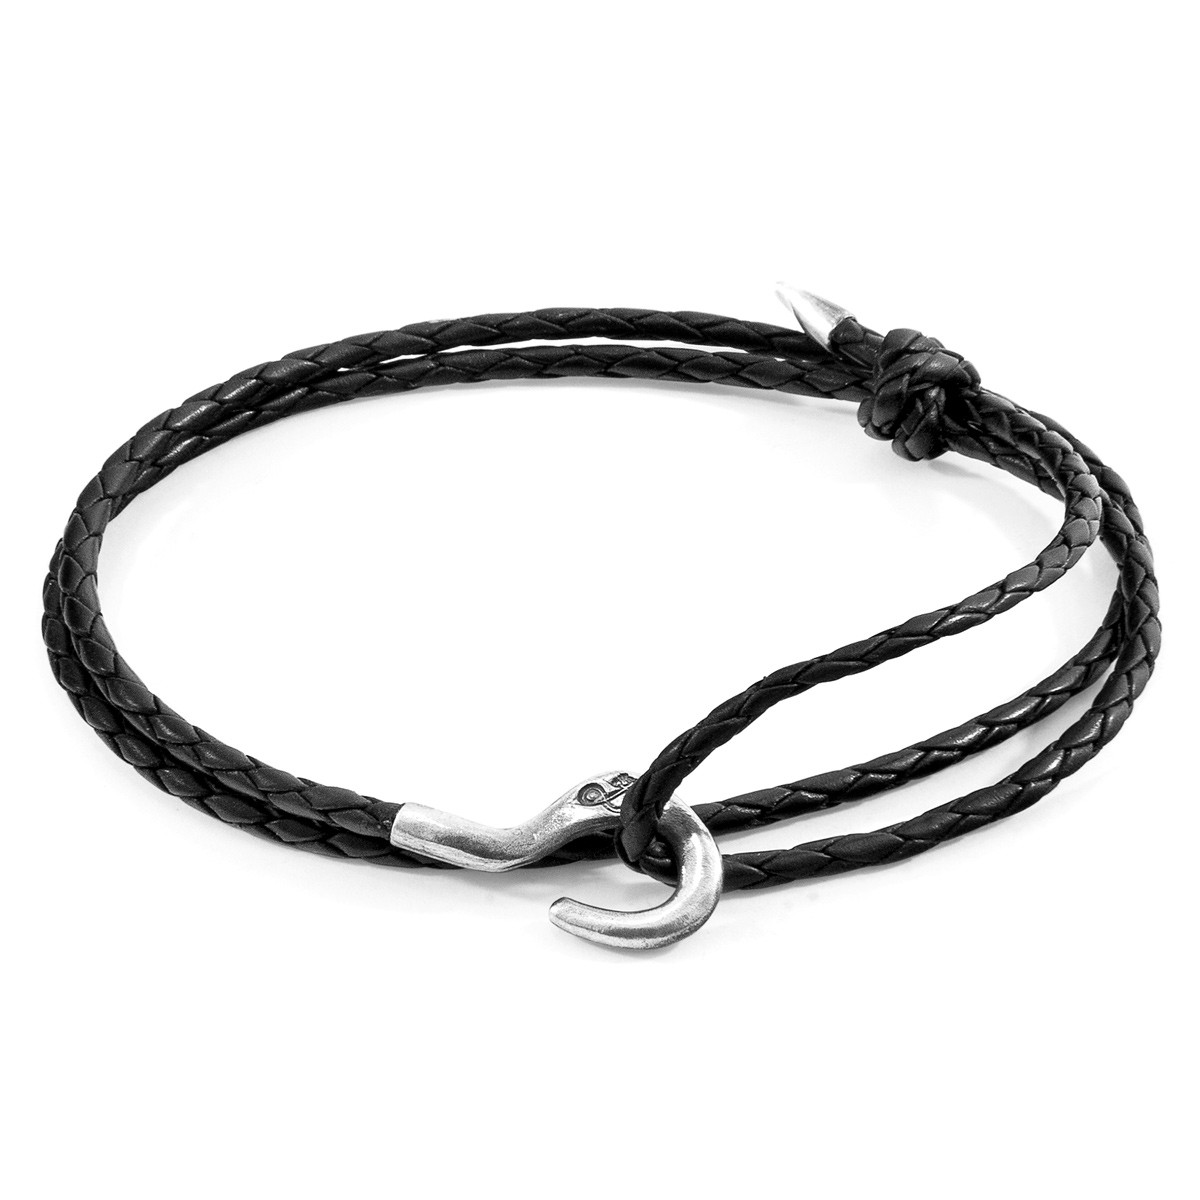 Anchor & Crew Midnight Black Charles Silver and Braided Leather SKINNY Bracelet